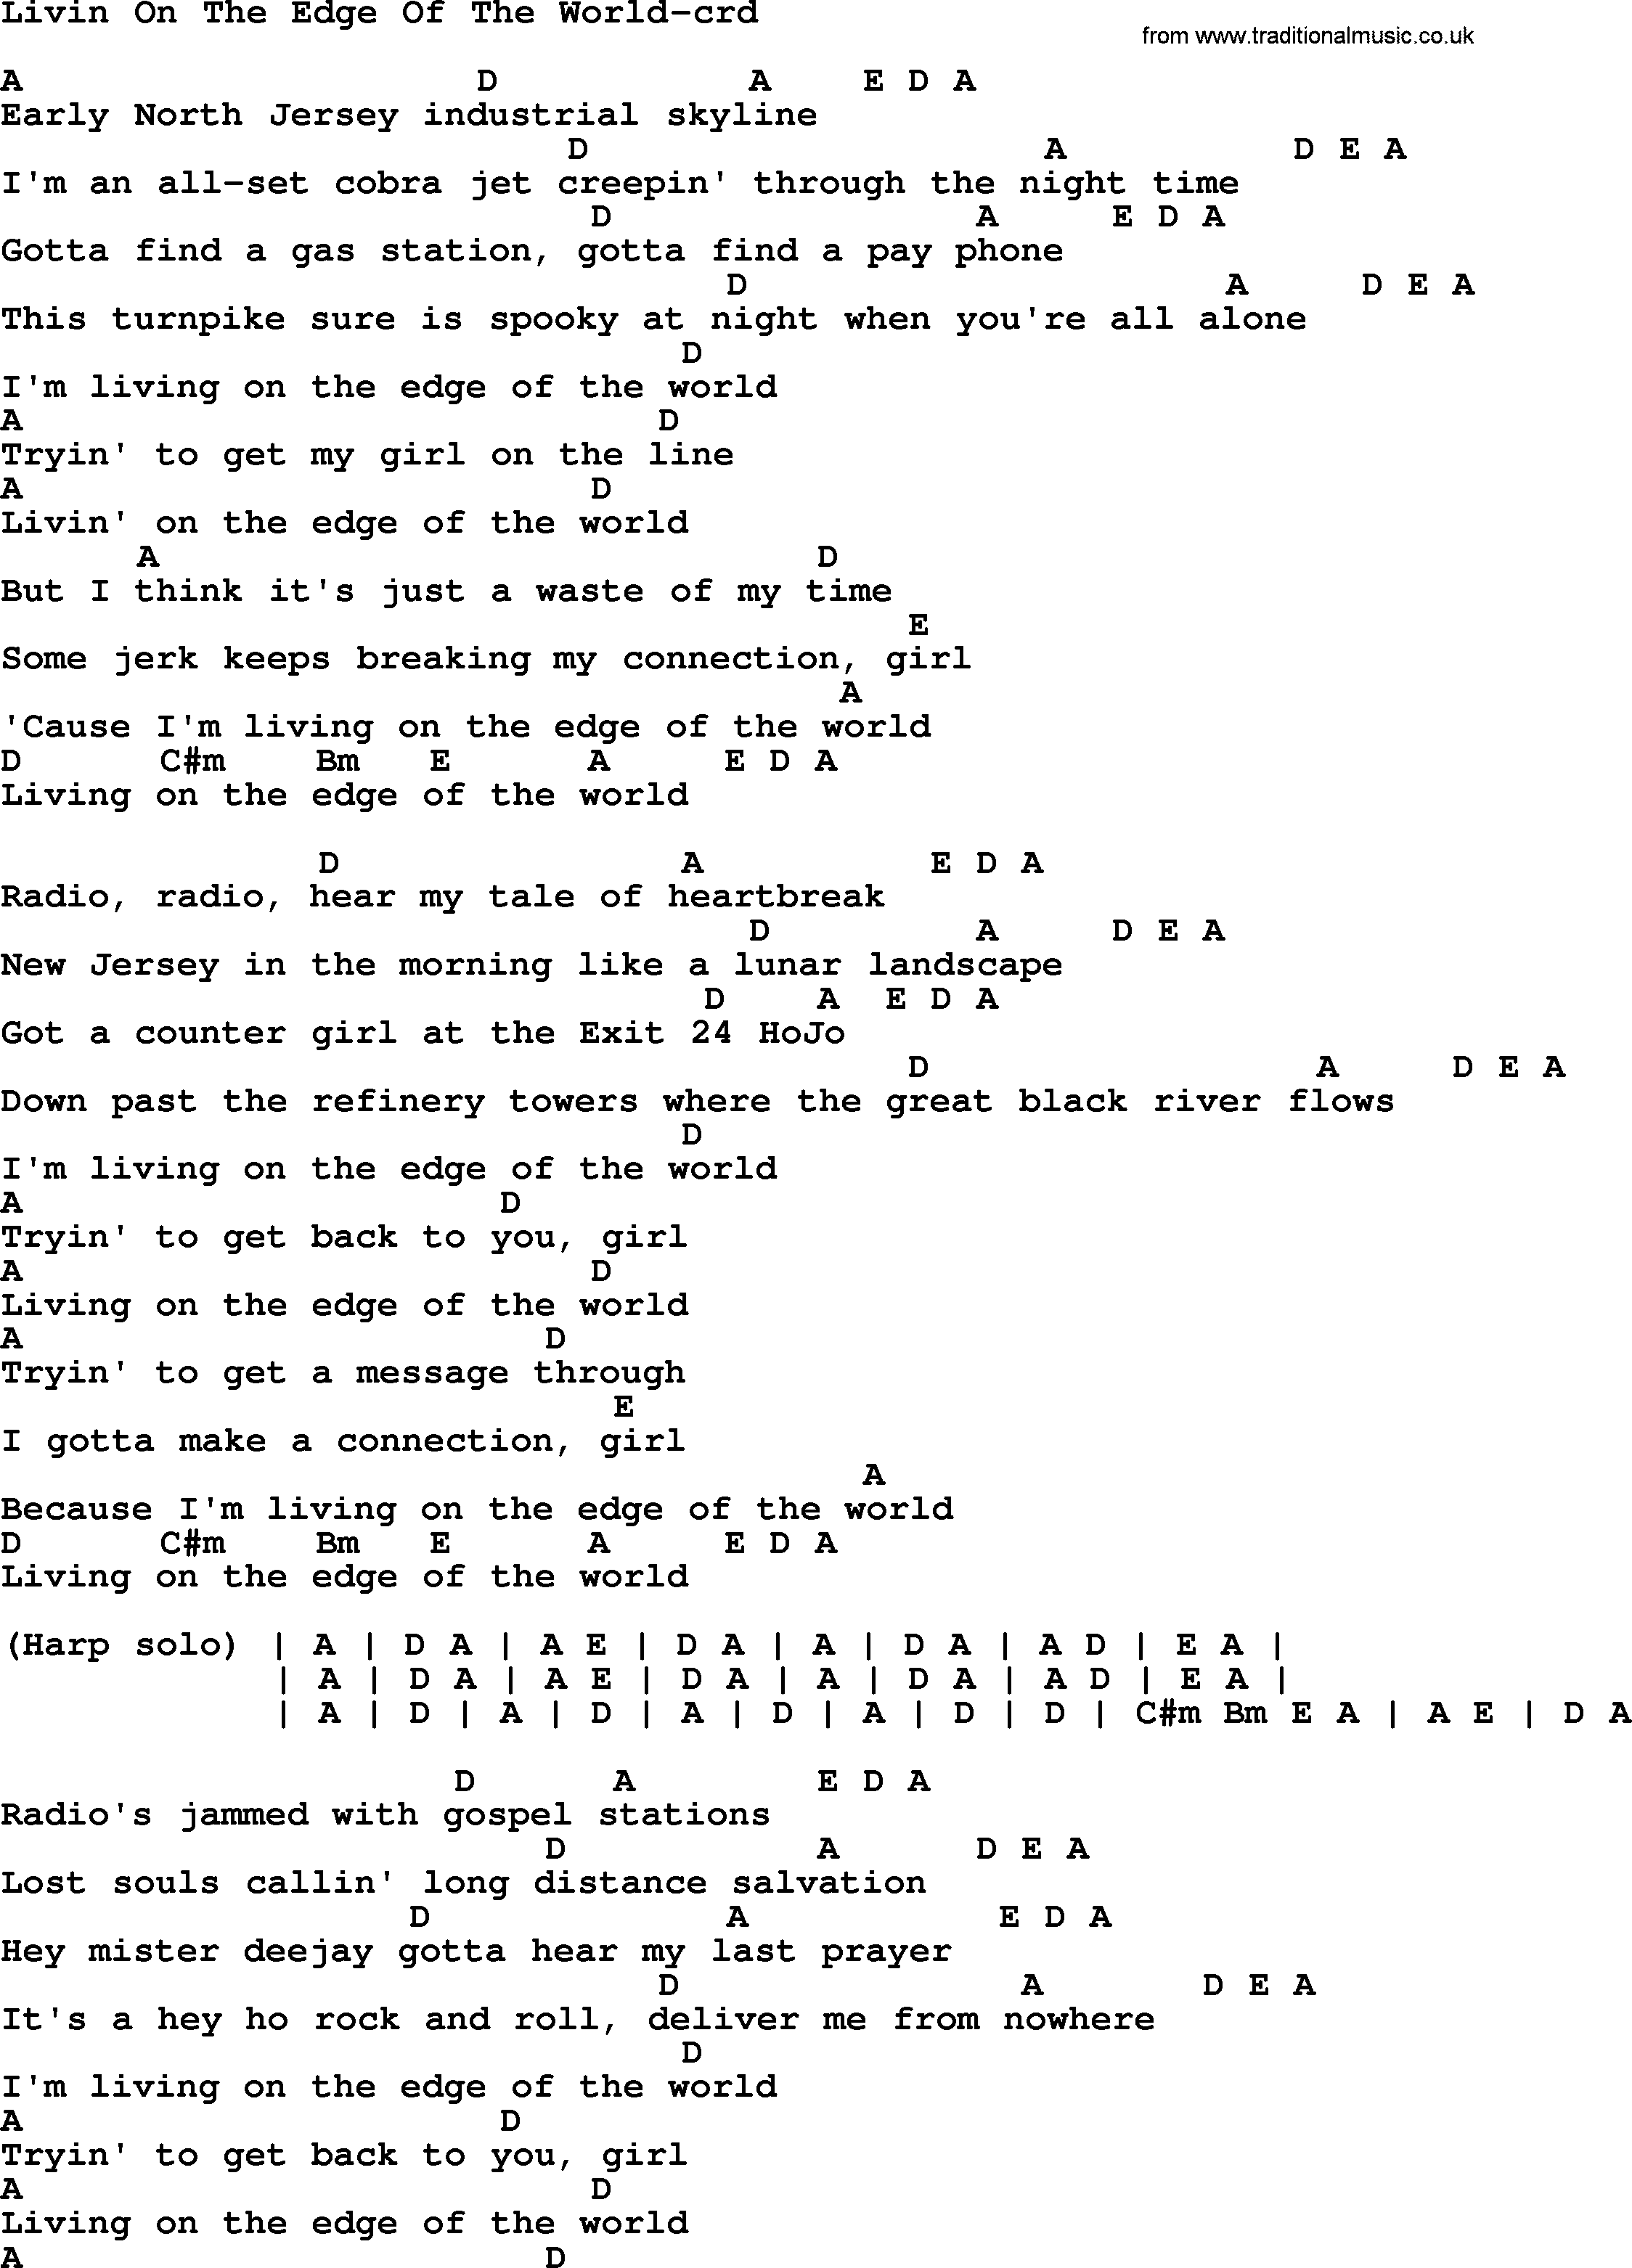 Bruce Springsteen song: Livin On The Edge Of The World, lyrics and chords